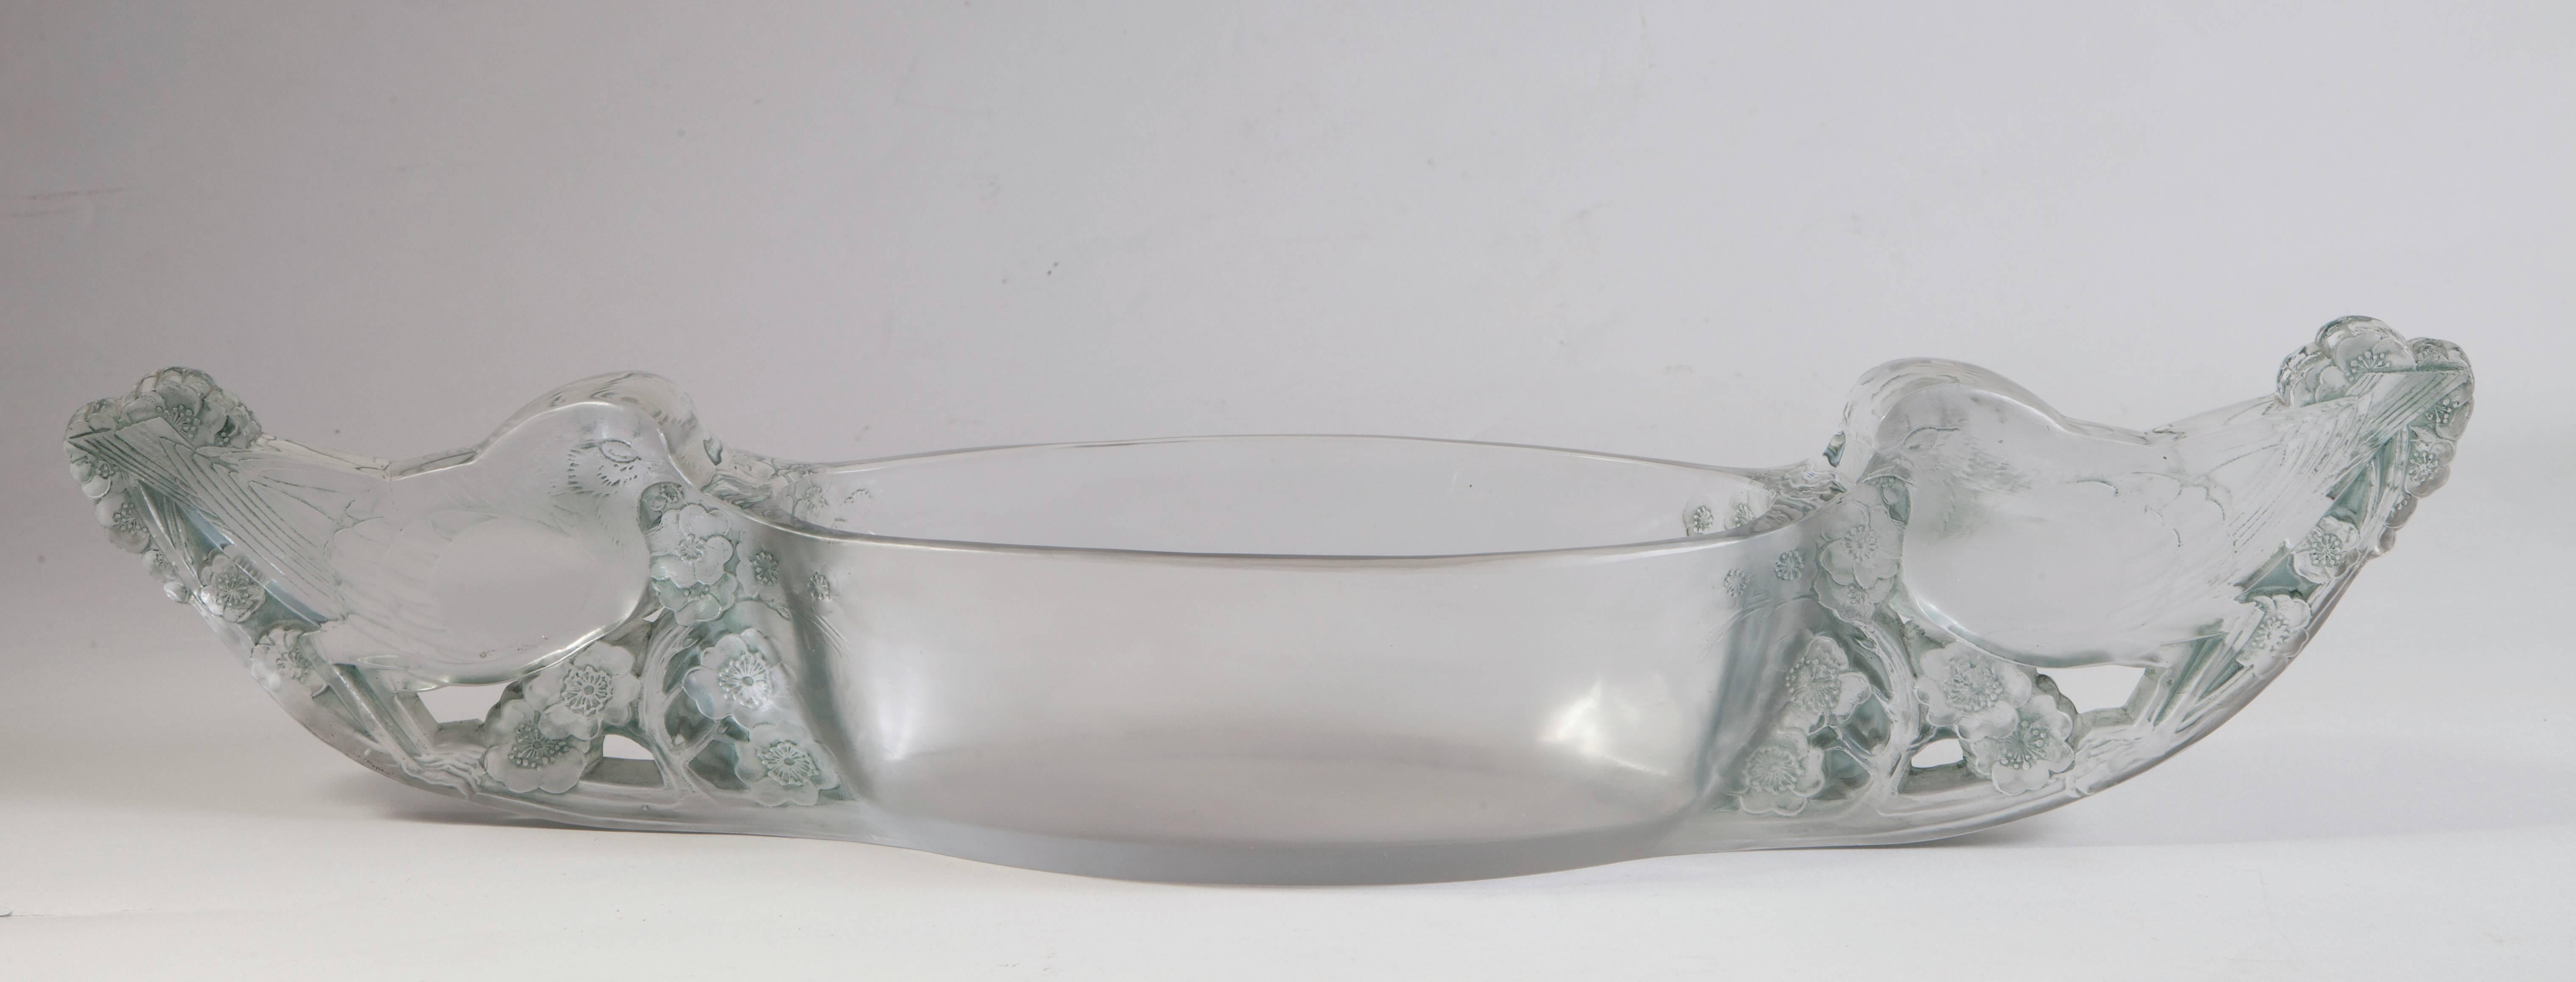 Rene Lalique table centre mesanges: 53.5 cm long 
heavily molded frosted glass bowl form with a facing bird resting on foliage on each end centre. 
Frosted bowl form flanked at each end by an inward facing patinated bird on branch thickly and